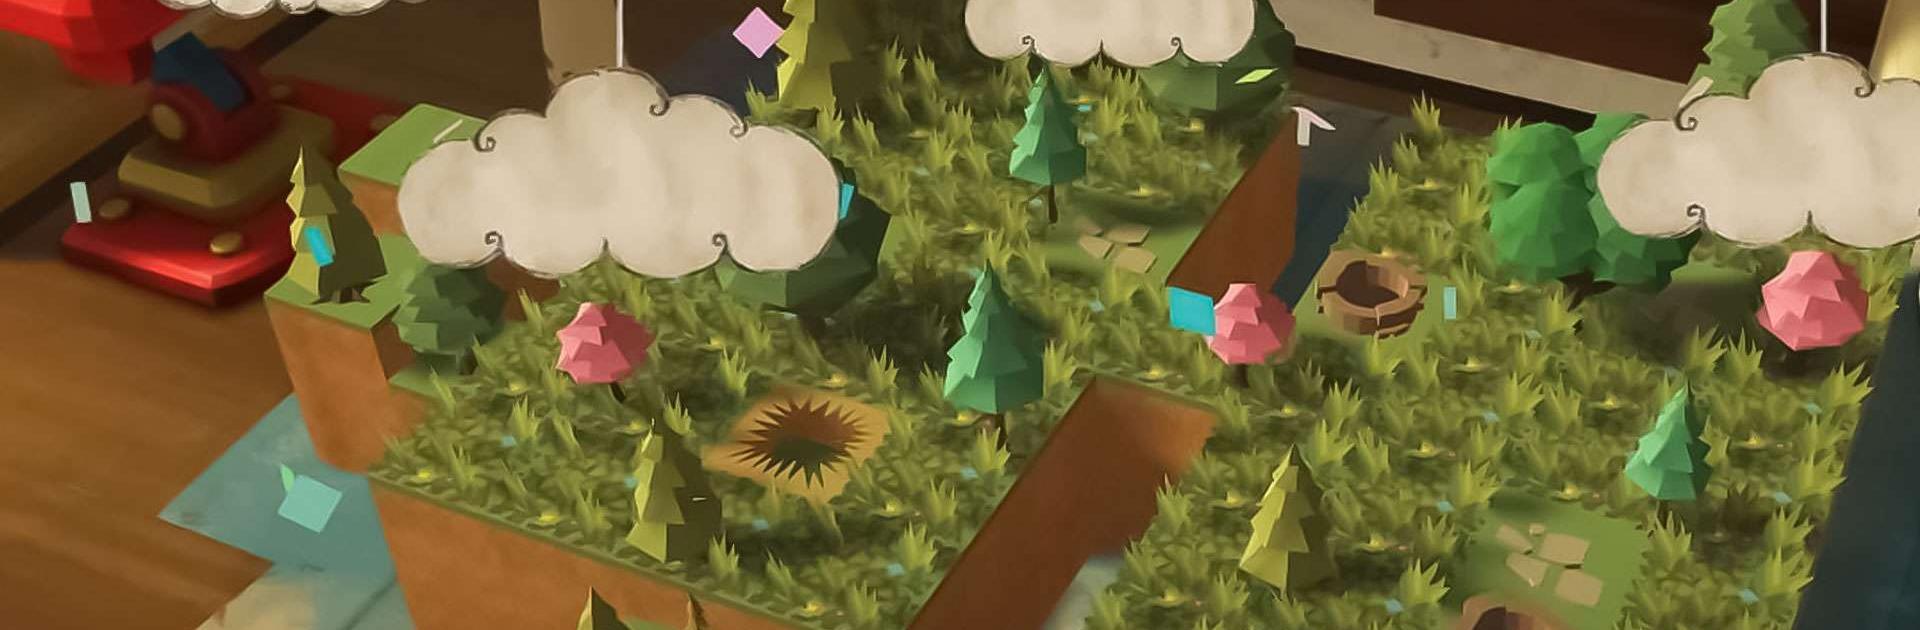 Evergrow: Paper Forest